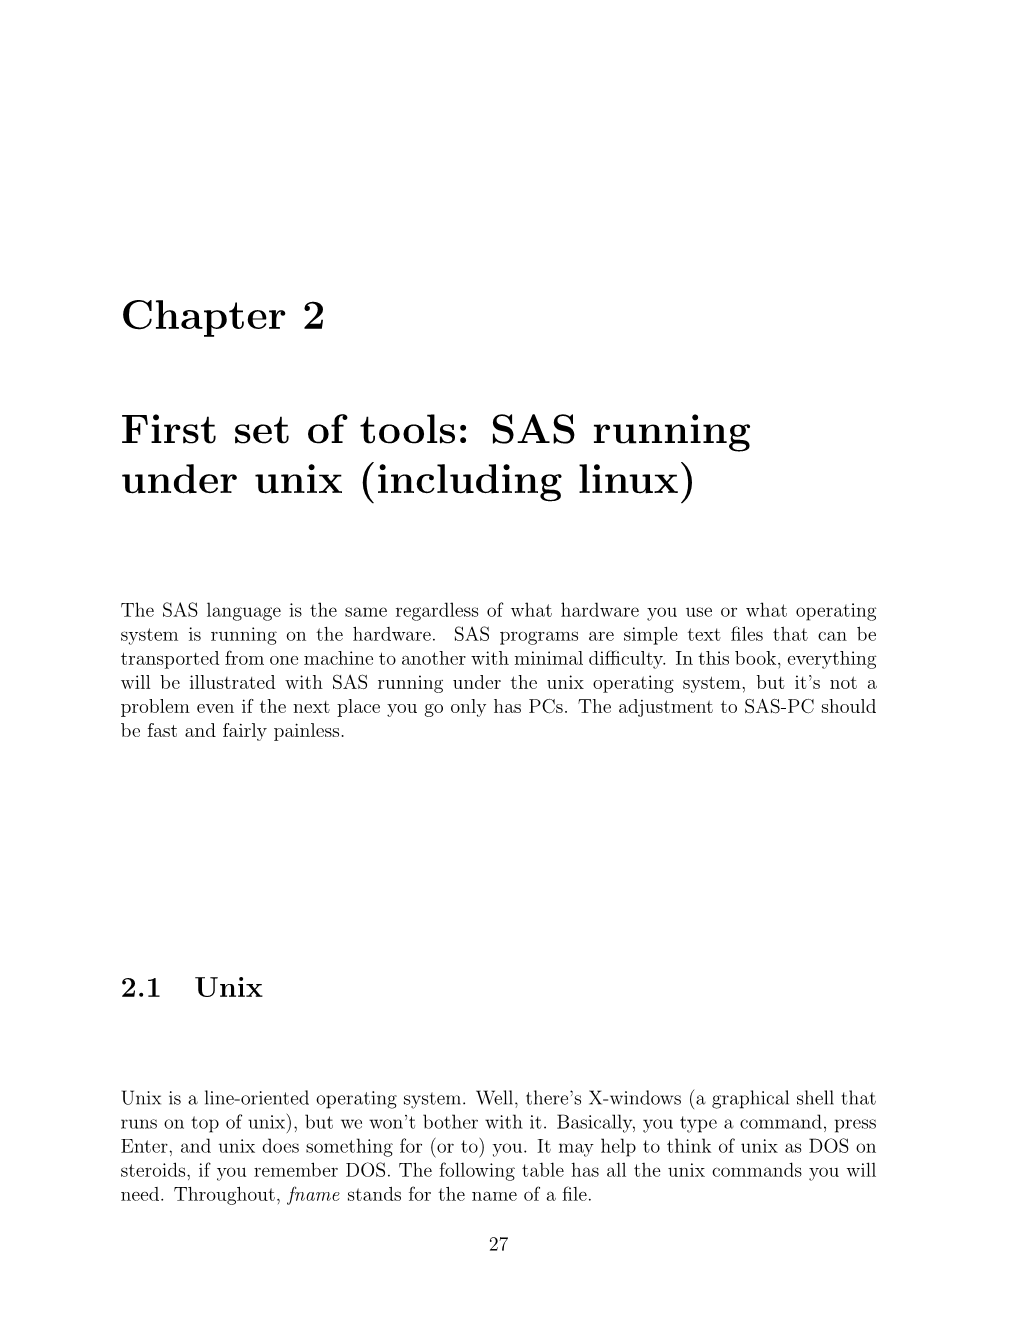 Chapter 2 First Set of Tools: SAS Running Under Unix (Including Linux)